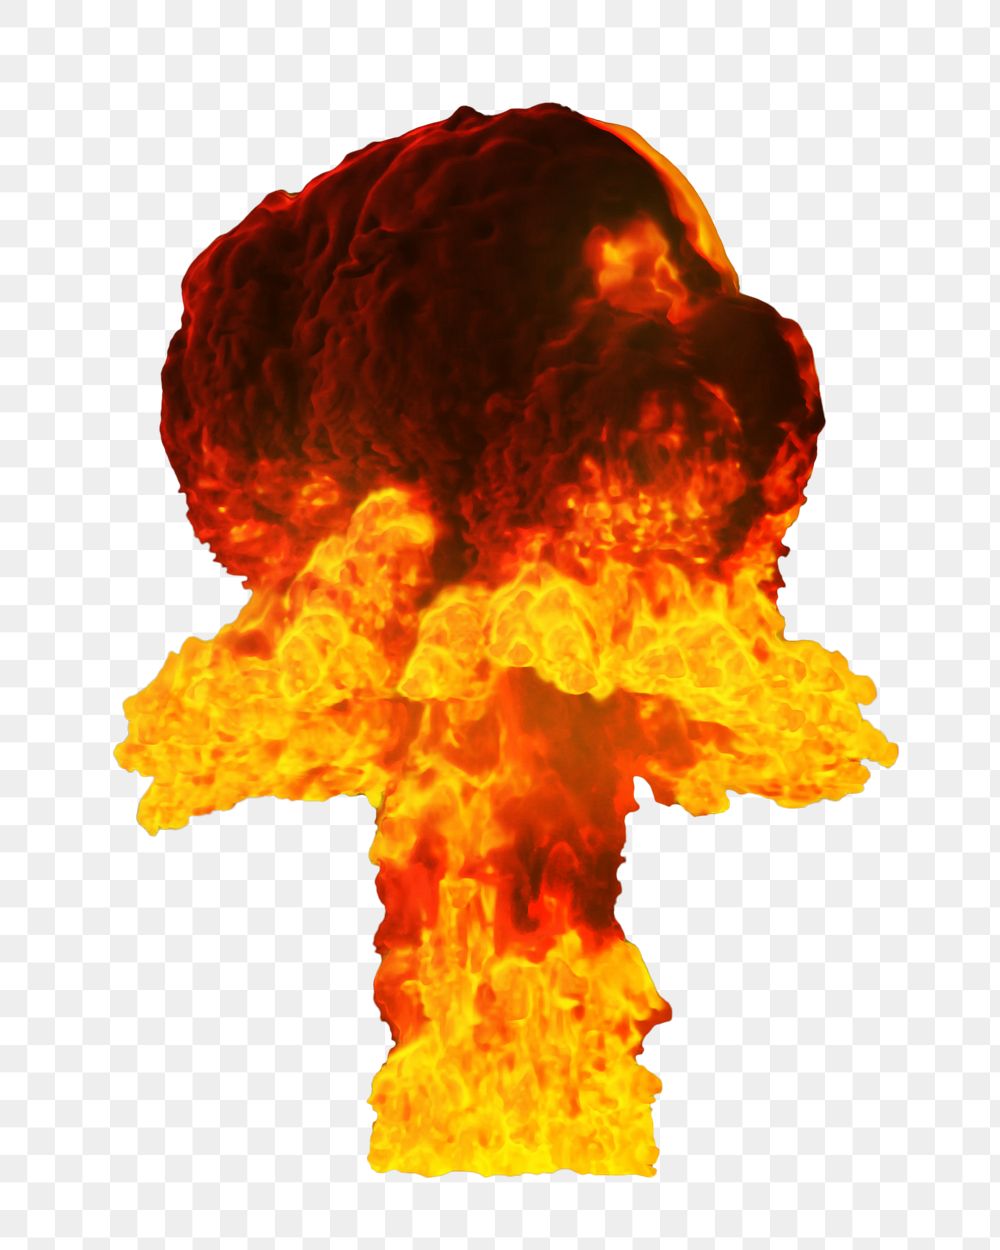 Bombing flame png, transparent background